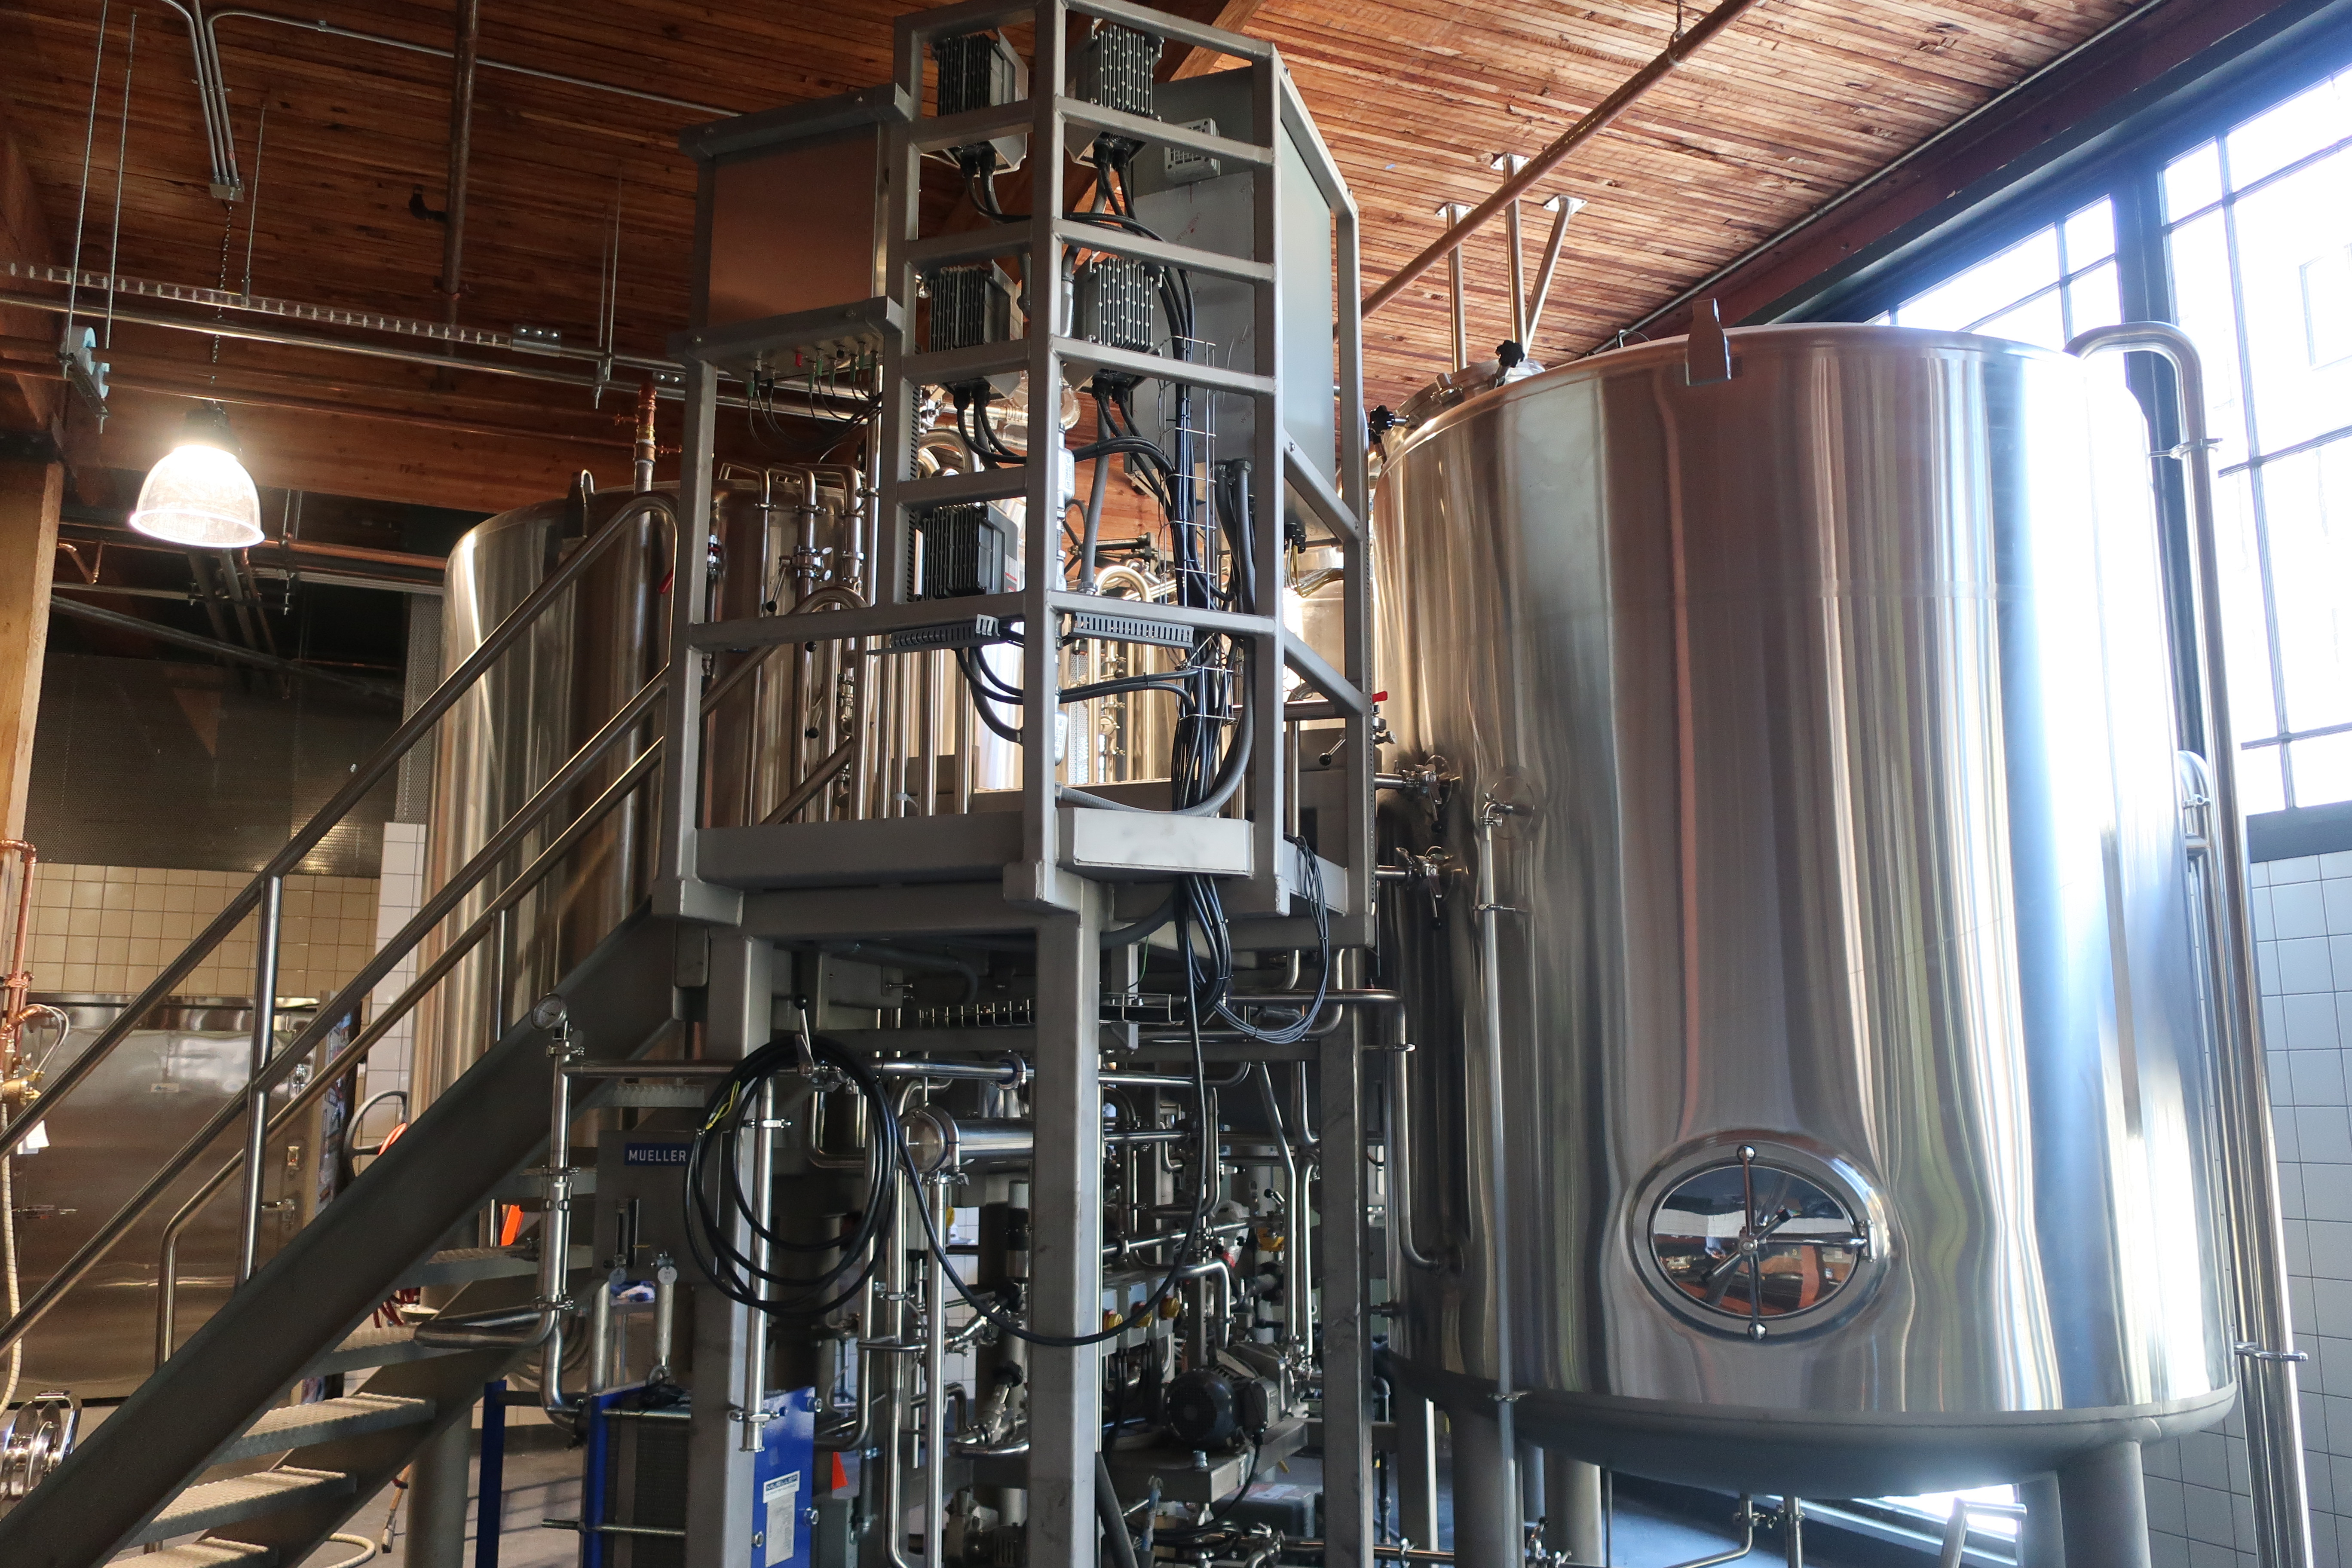 The 15-barrel brewhouse build by Mueller at Elysian Brewing - Capitol Hill.